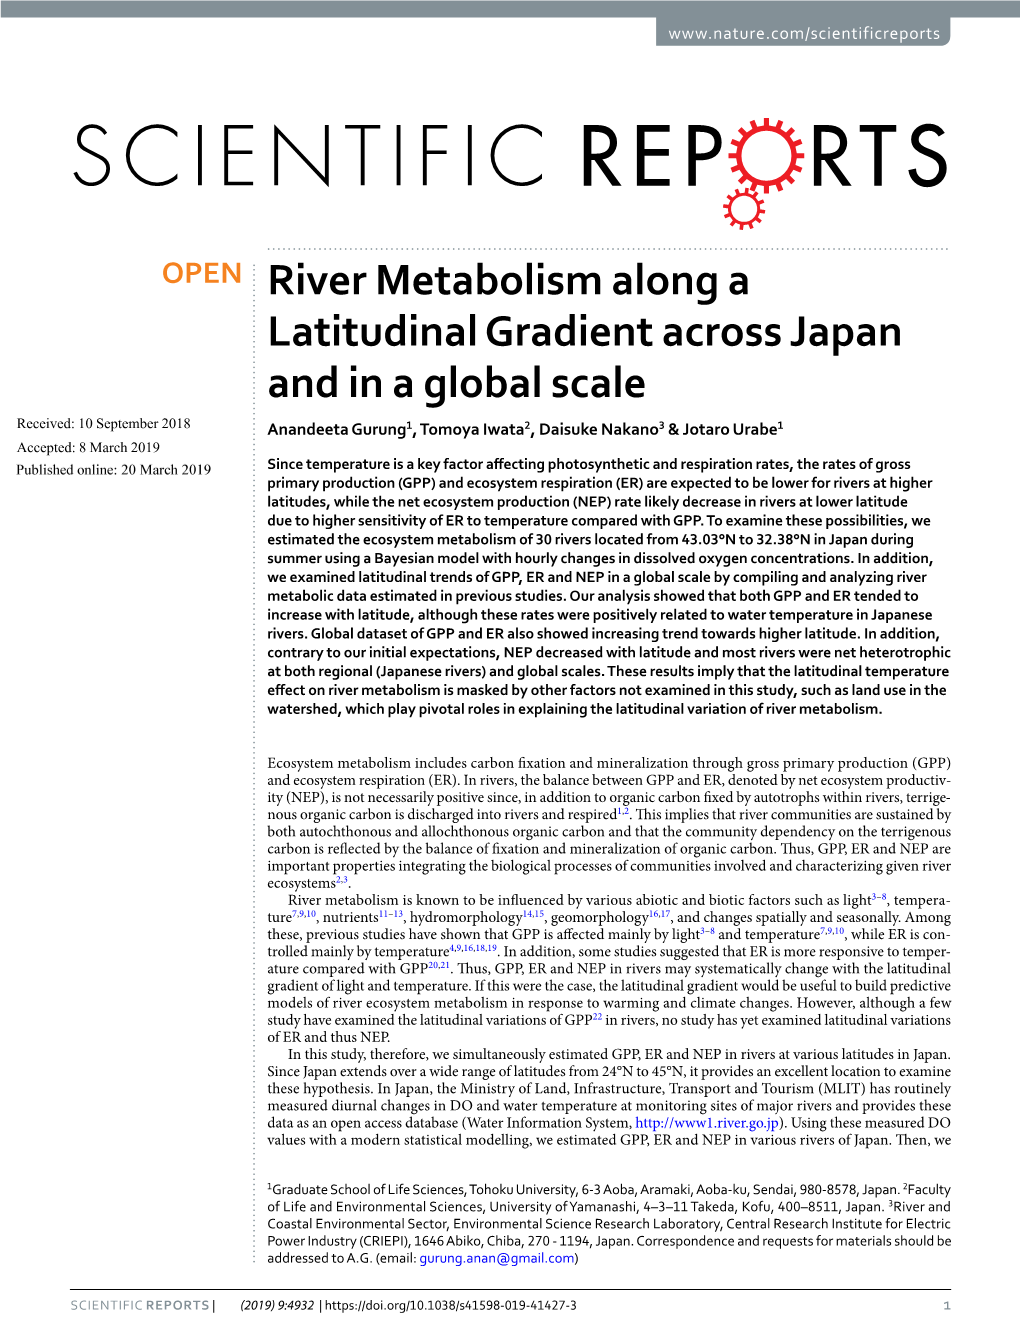 River Metabolism Along a Latitudinal Gradient Across Japan and in A